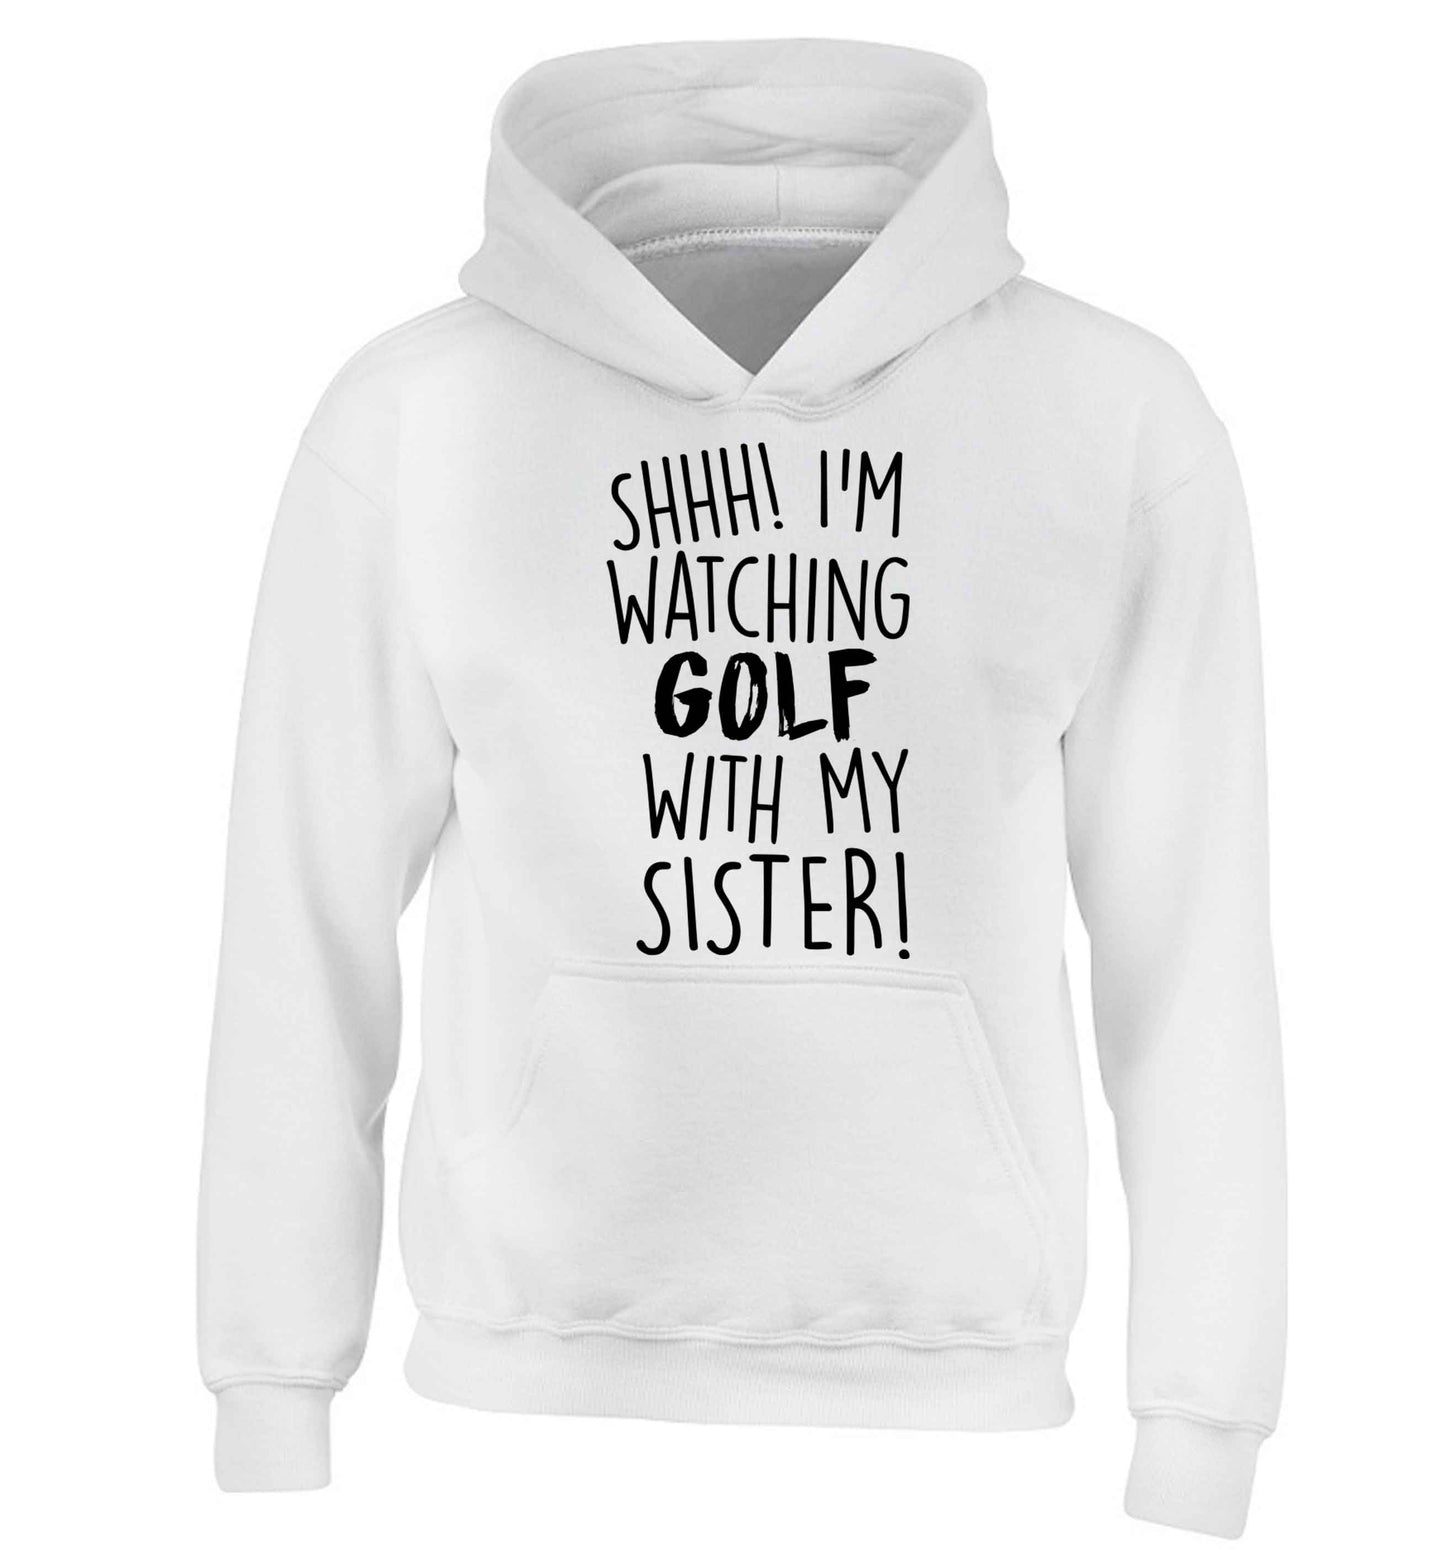 Shh I'm watching golf with my sister children's white hoodie 12-13 Years